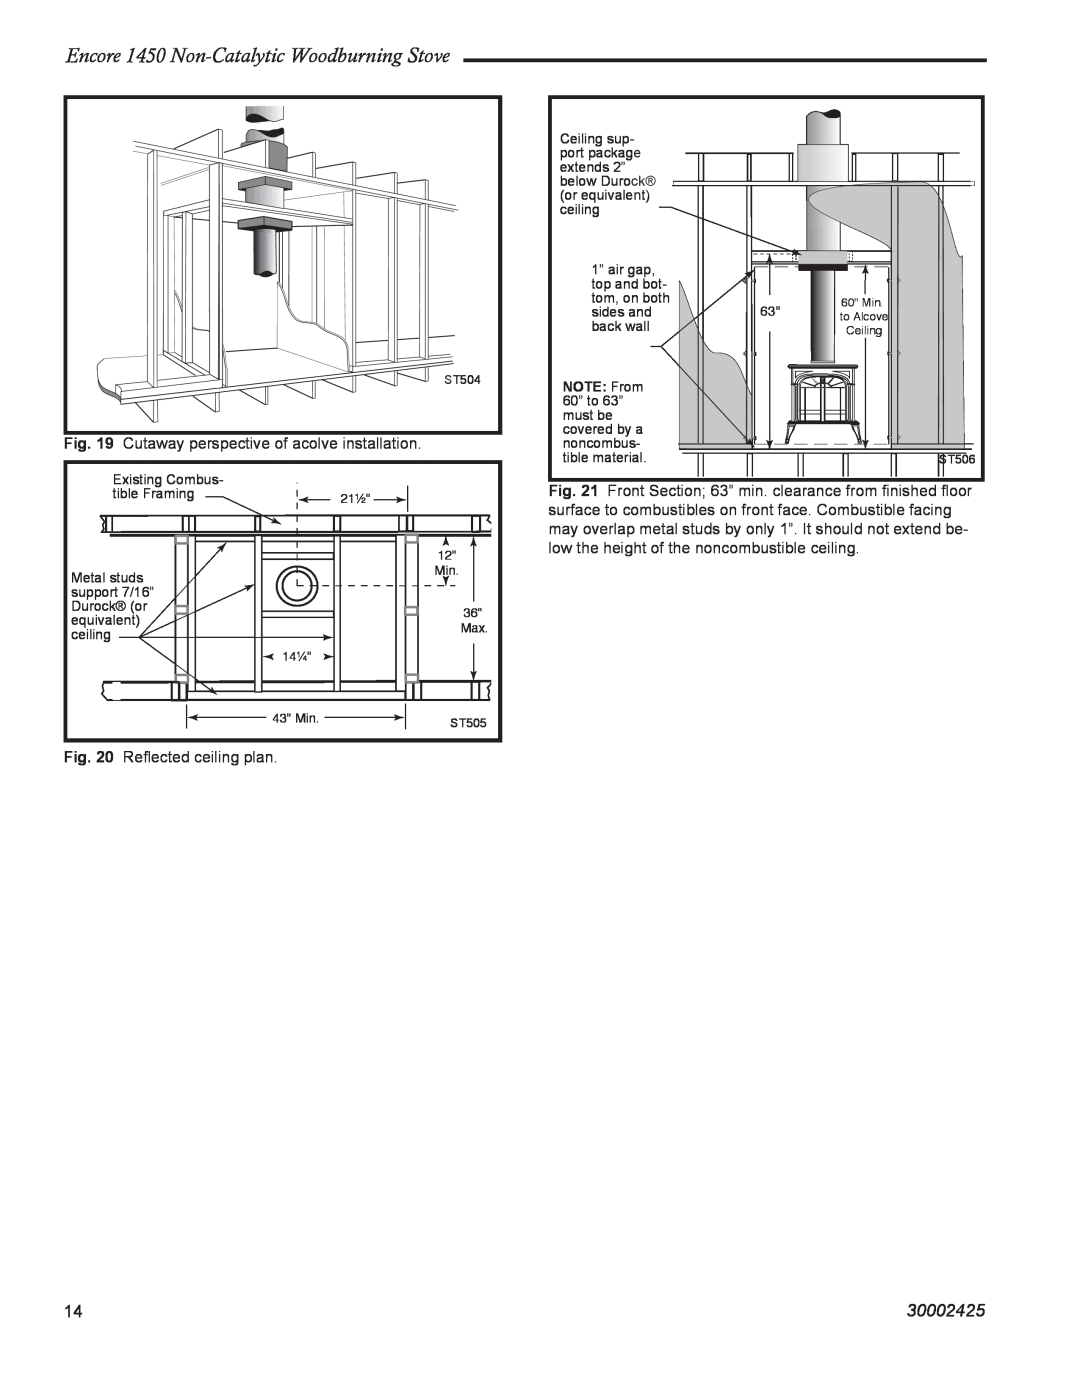 Vermont Casting Encore NC 1450 installation instructions Encore 1450 Non-CatalyticWoodburning Stove, 30002425 